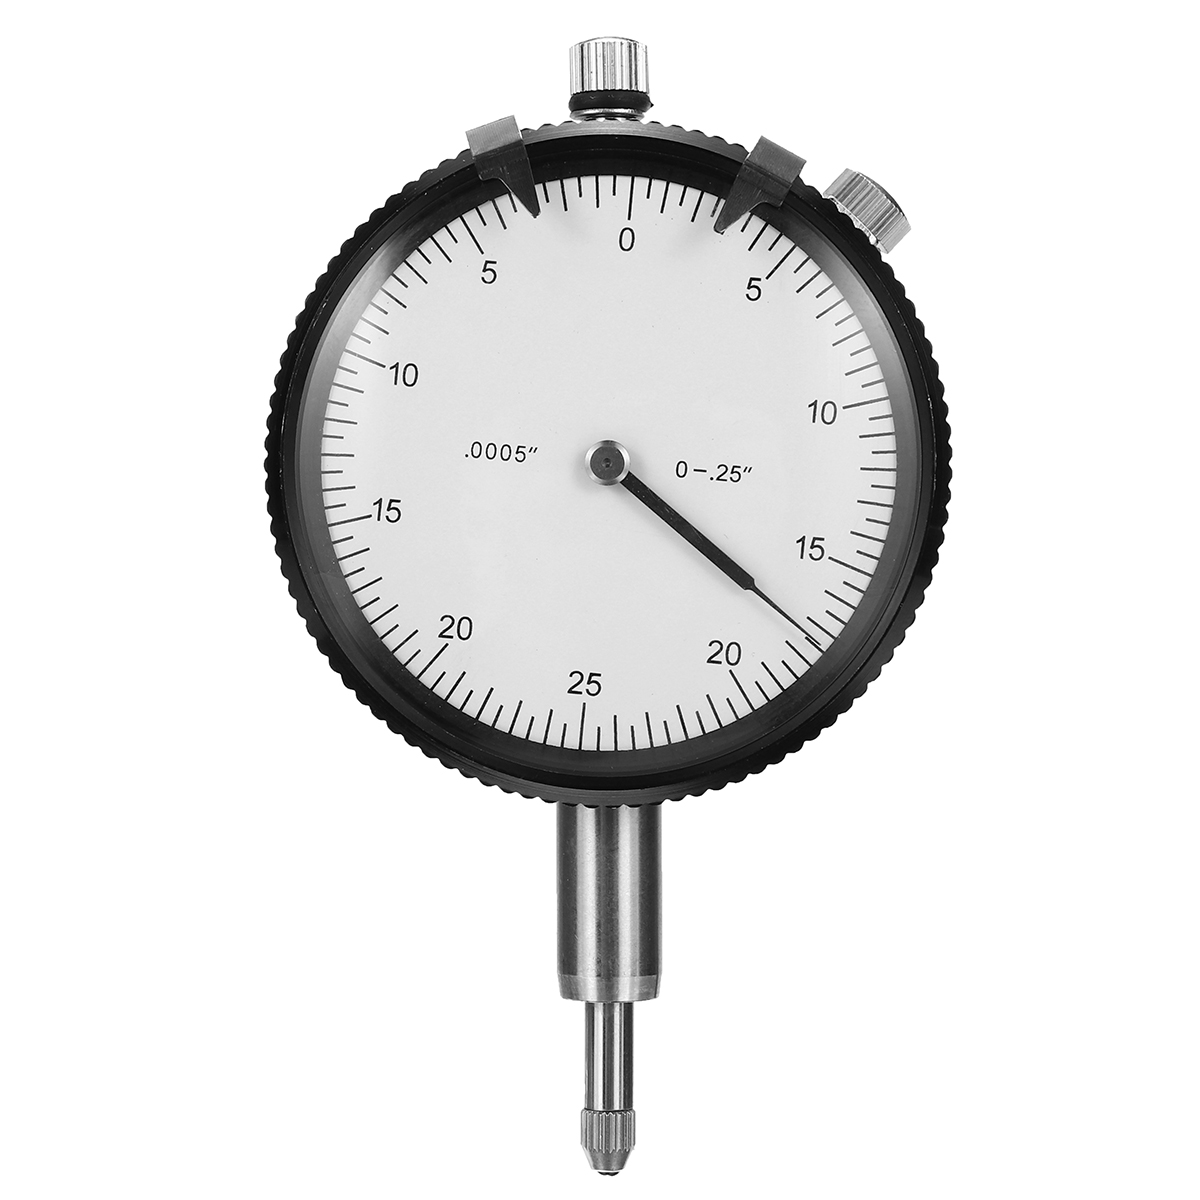 Engine-Cylinder-2-6-Inch-Dial-Bore-Gauge-Measuring-Dial-Indicator-Resolution-00005-Inch-1349647-6